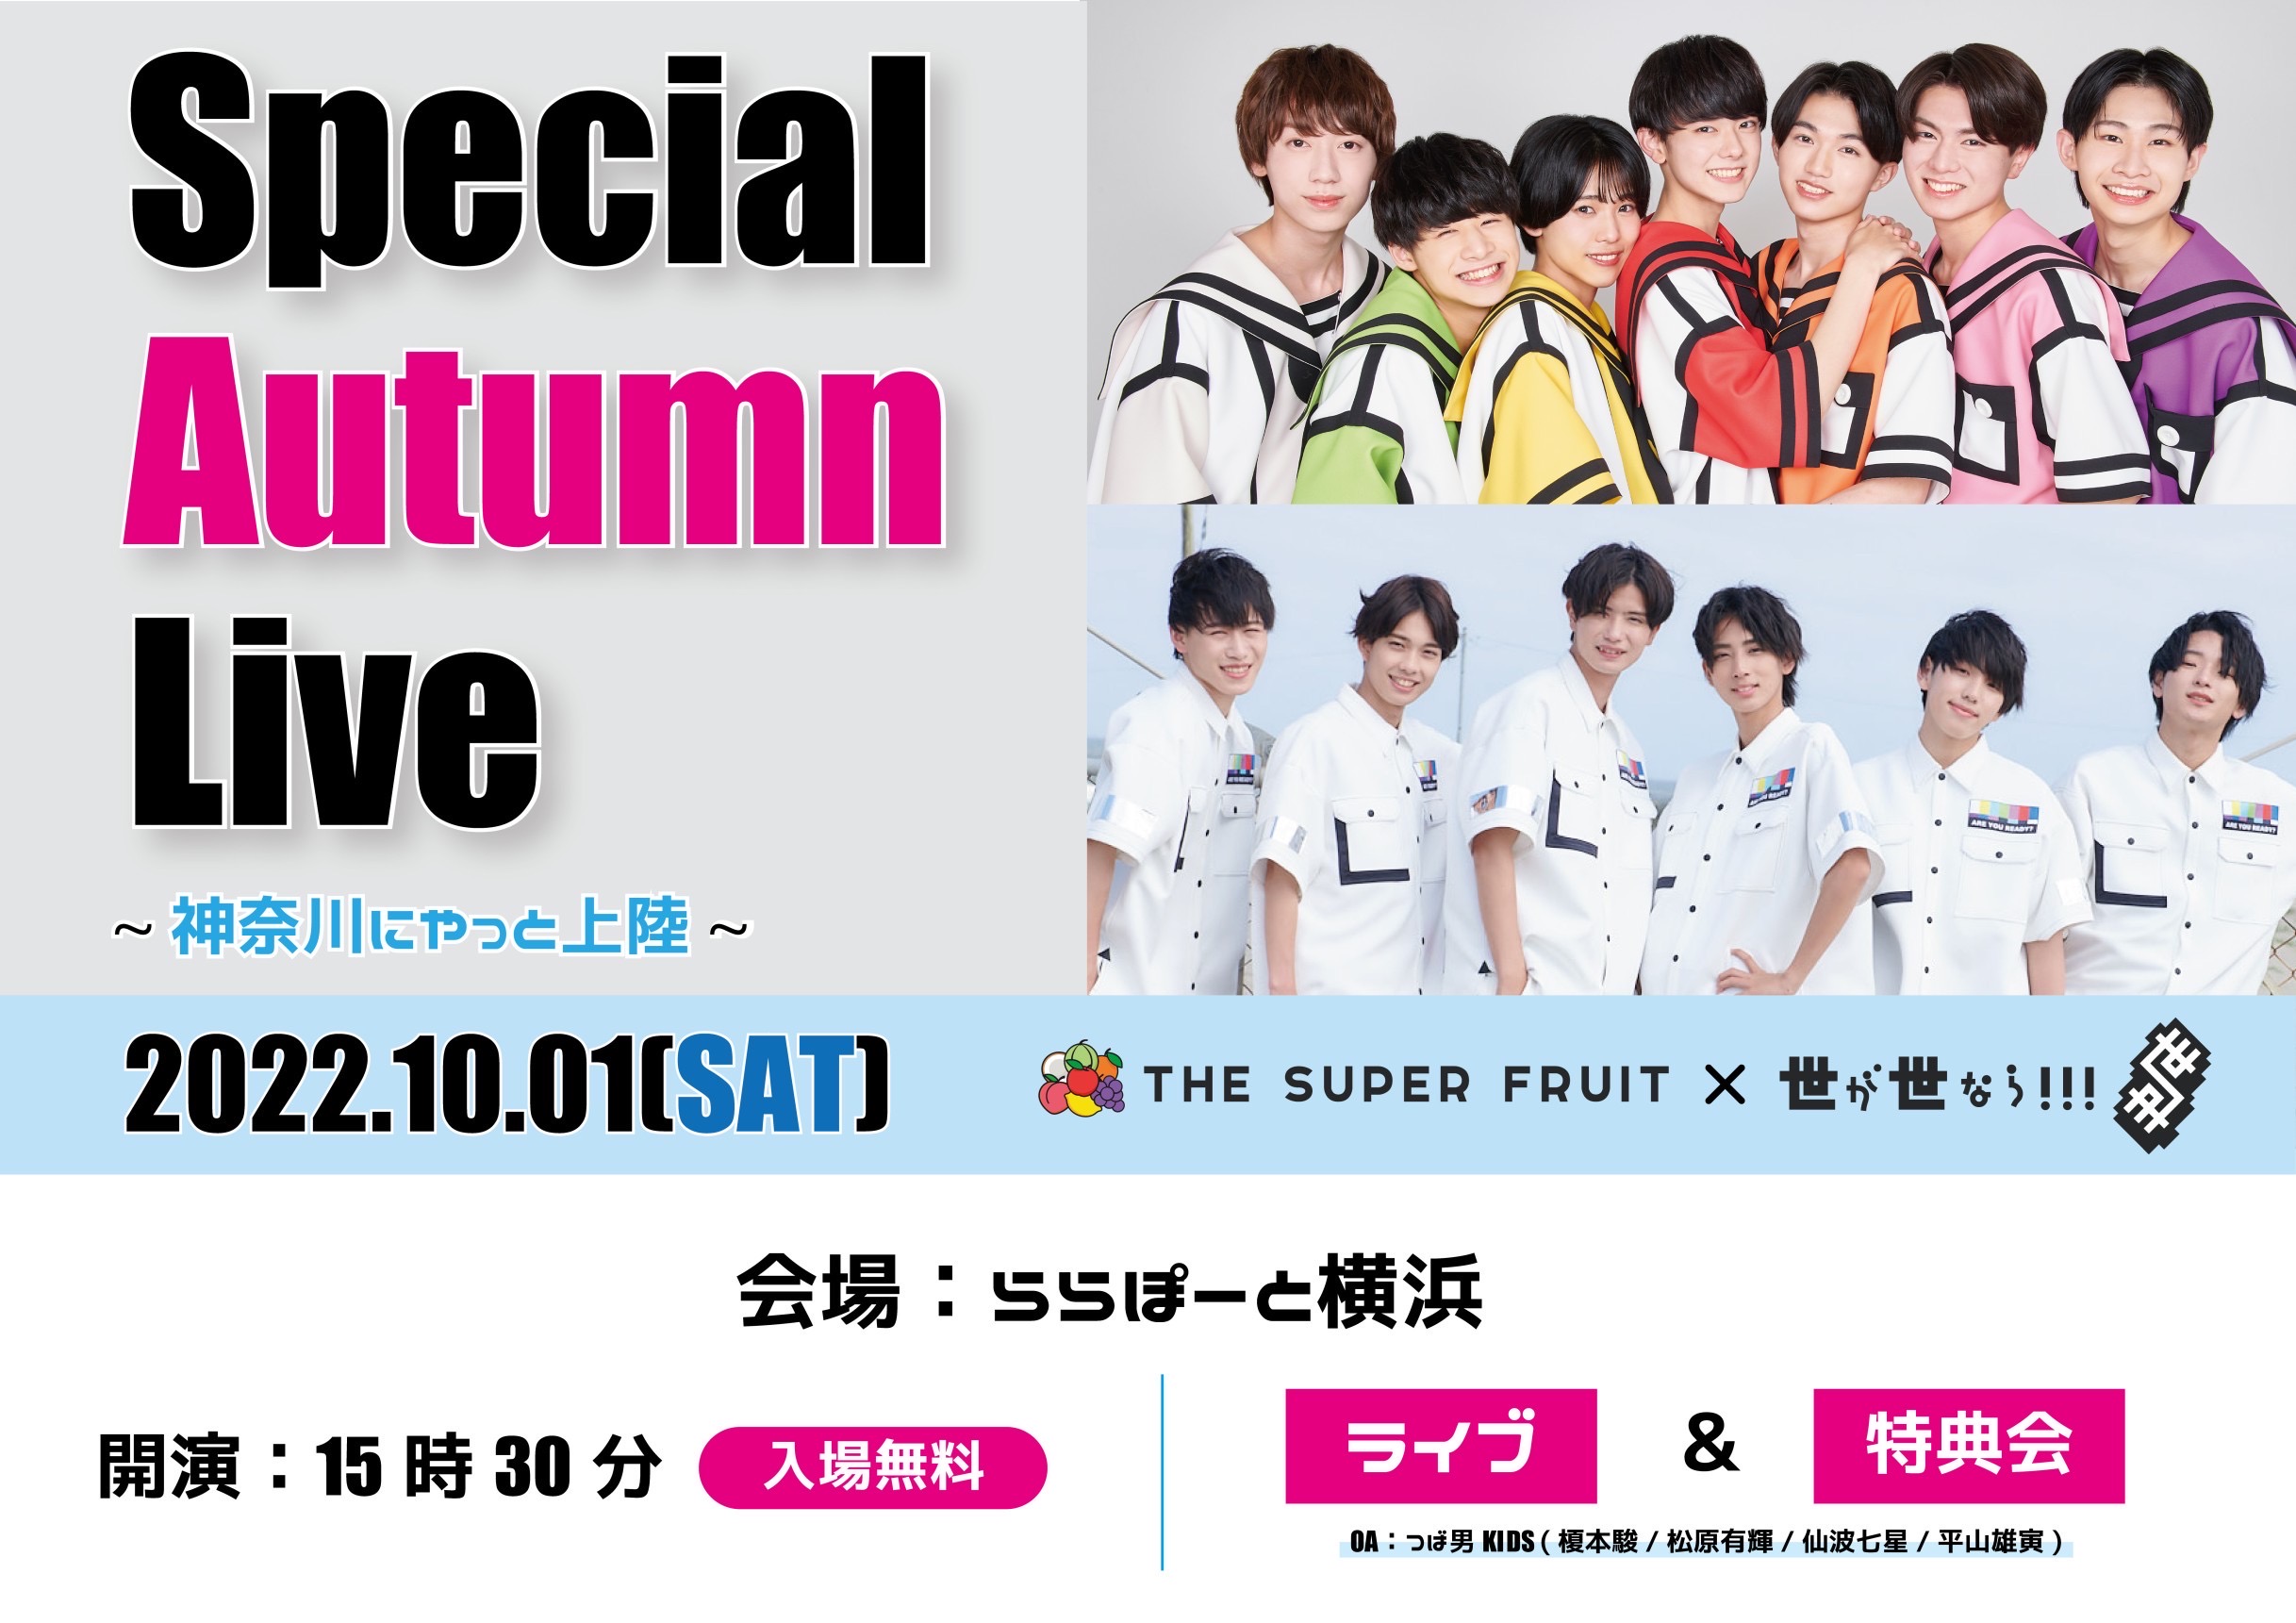 【NEWS】結成記念日🍏10月1日(土)に「THE SUPER FRUIT×世が世なら!!! Special Autumn Live 〜神奈川にやっと上陸 〜」フリーライブ開催決定！